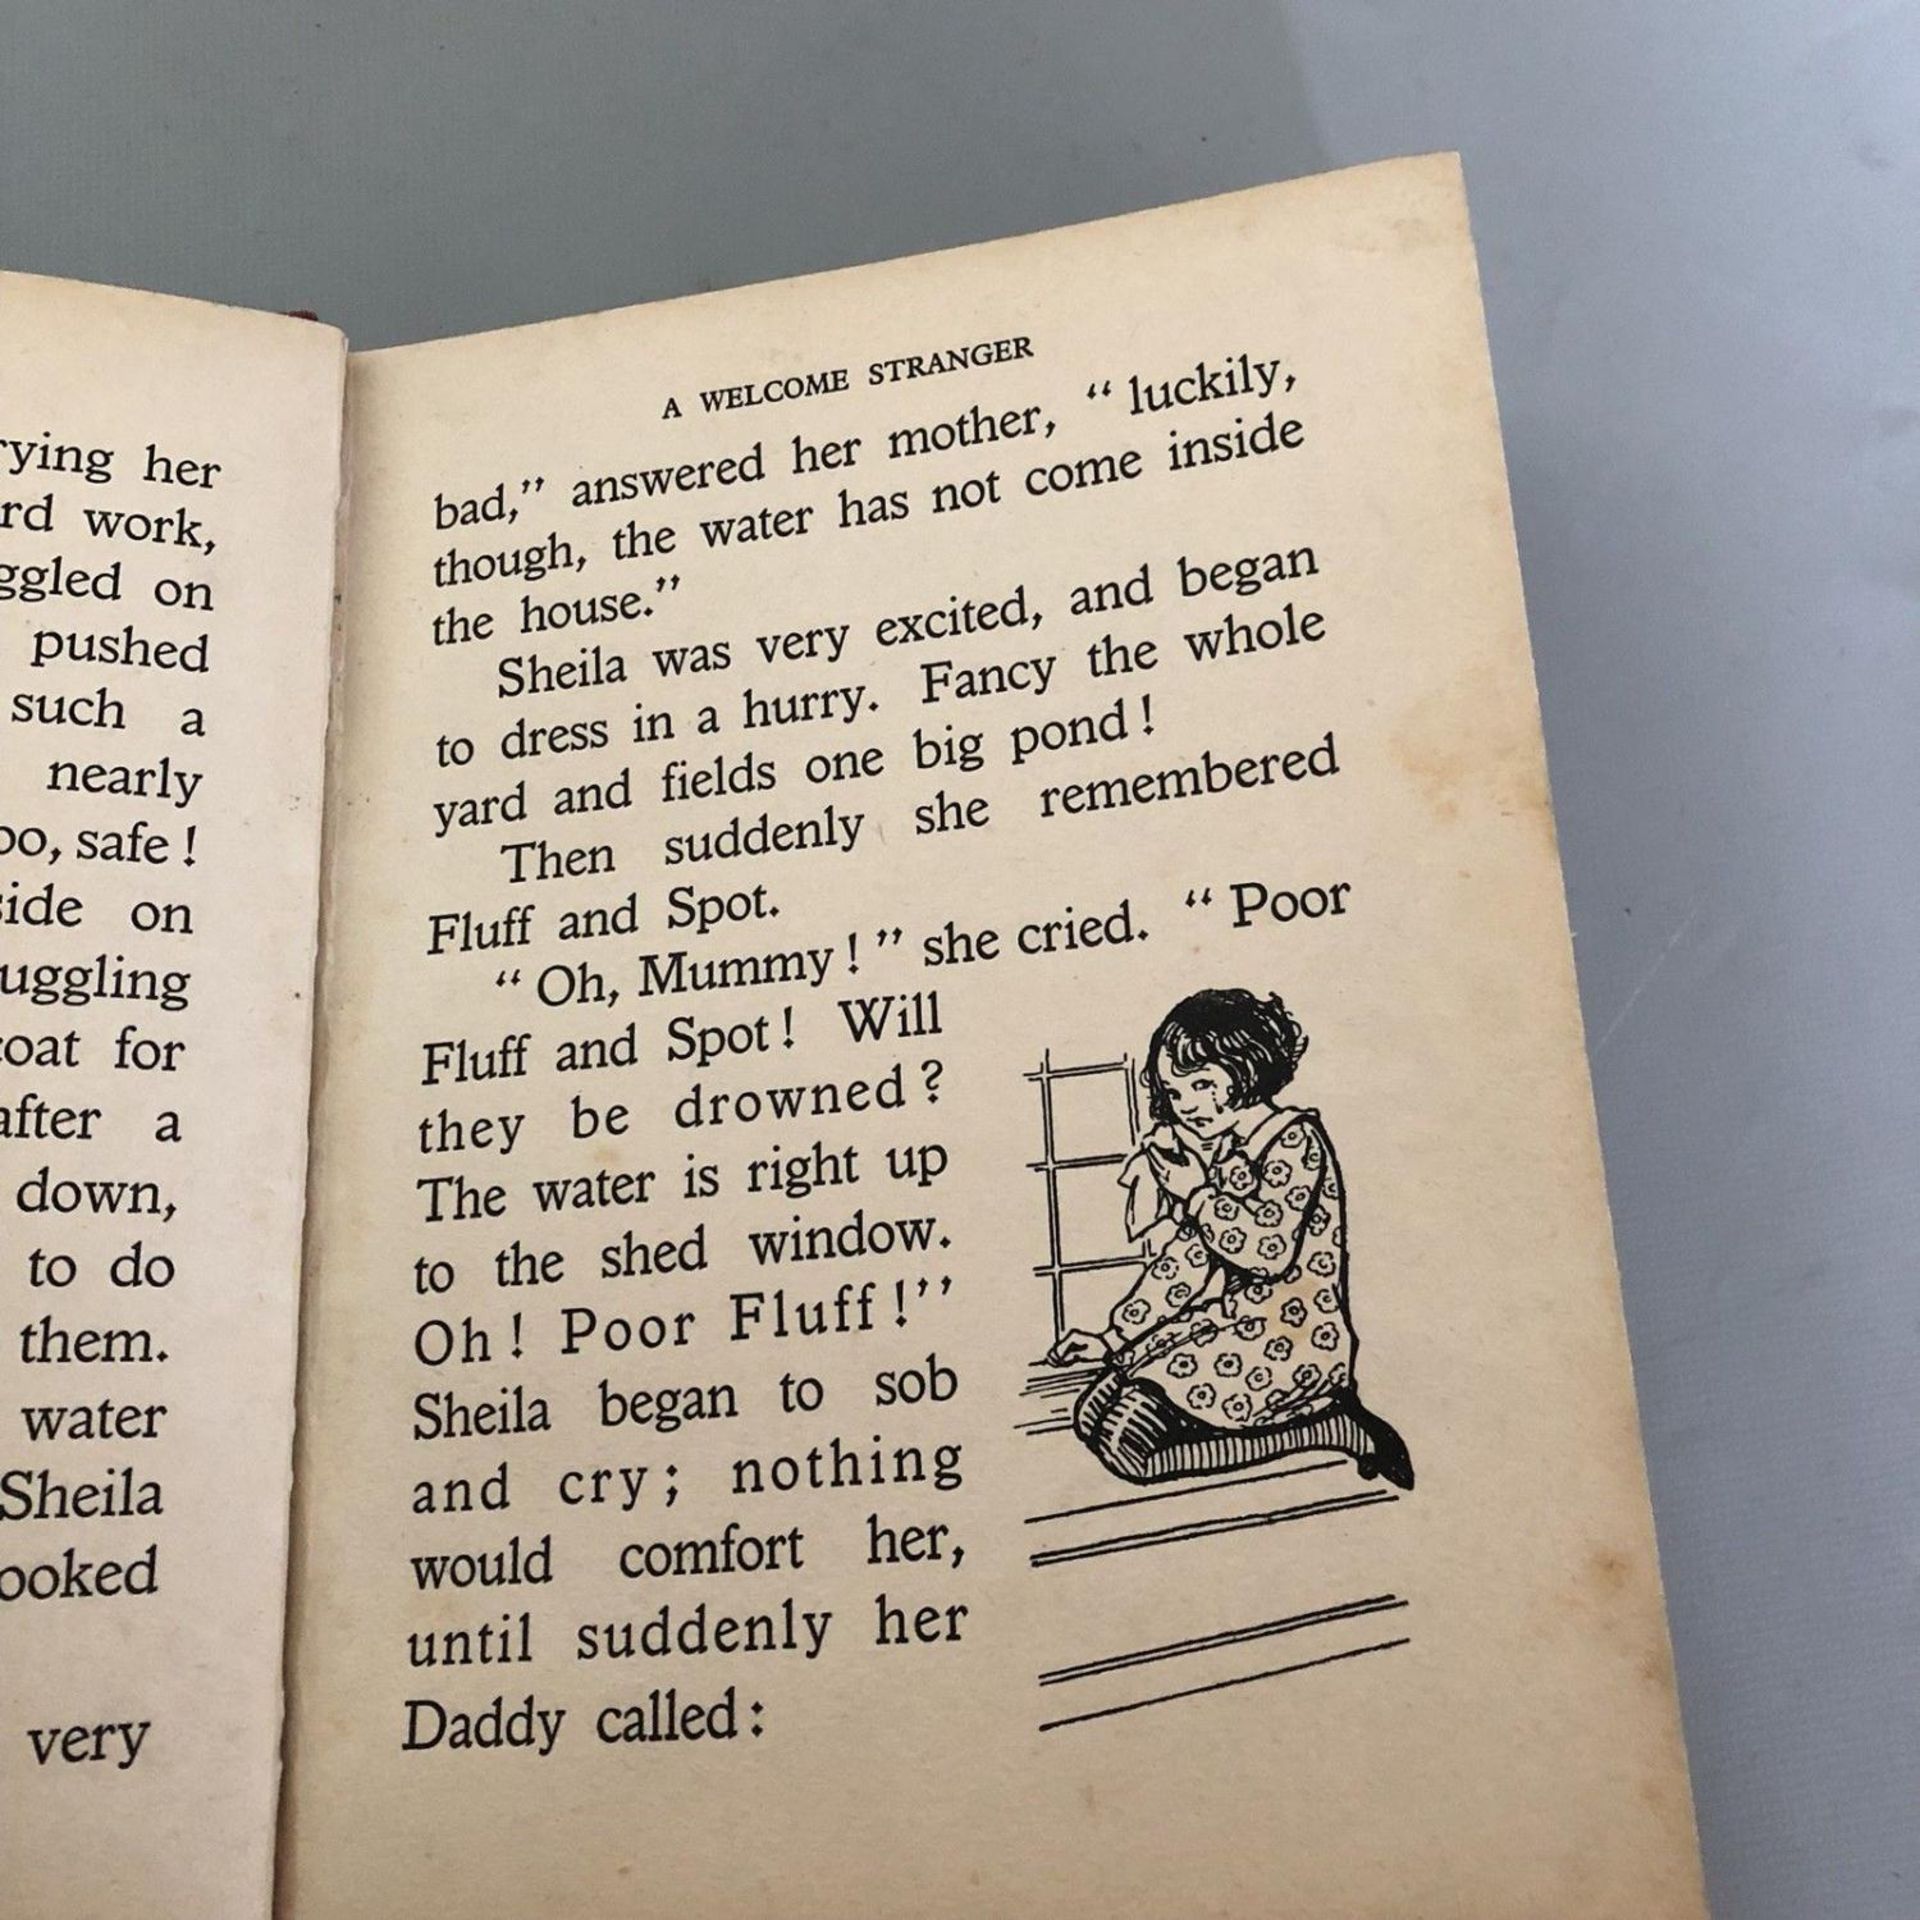 Vintage 1940s Children's Book "Once upon a Time" Stories Pictures Etc - Image 3 of 5